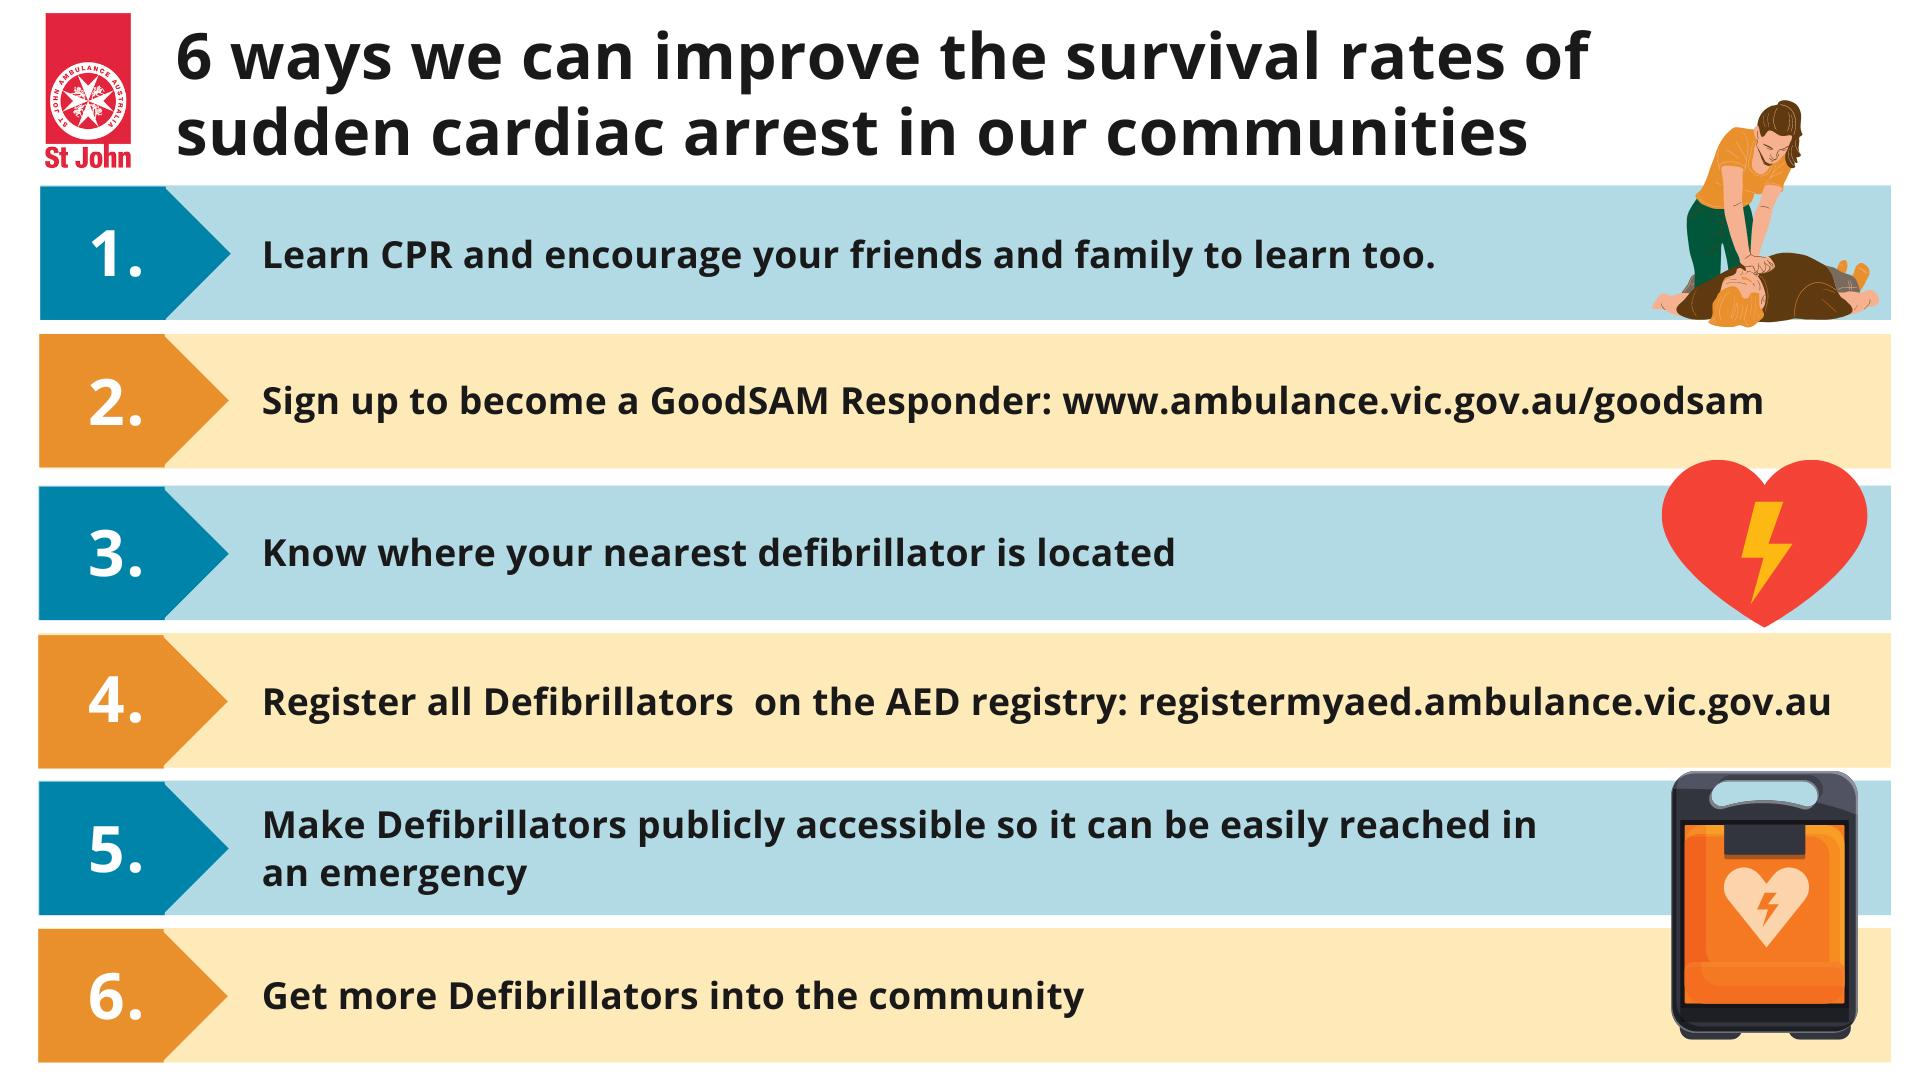 6 ways we can improve the survival rates of sudden cardiac arrest in our communities